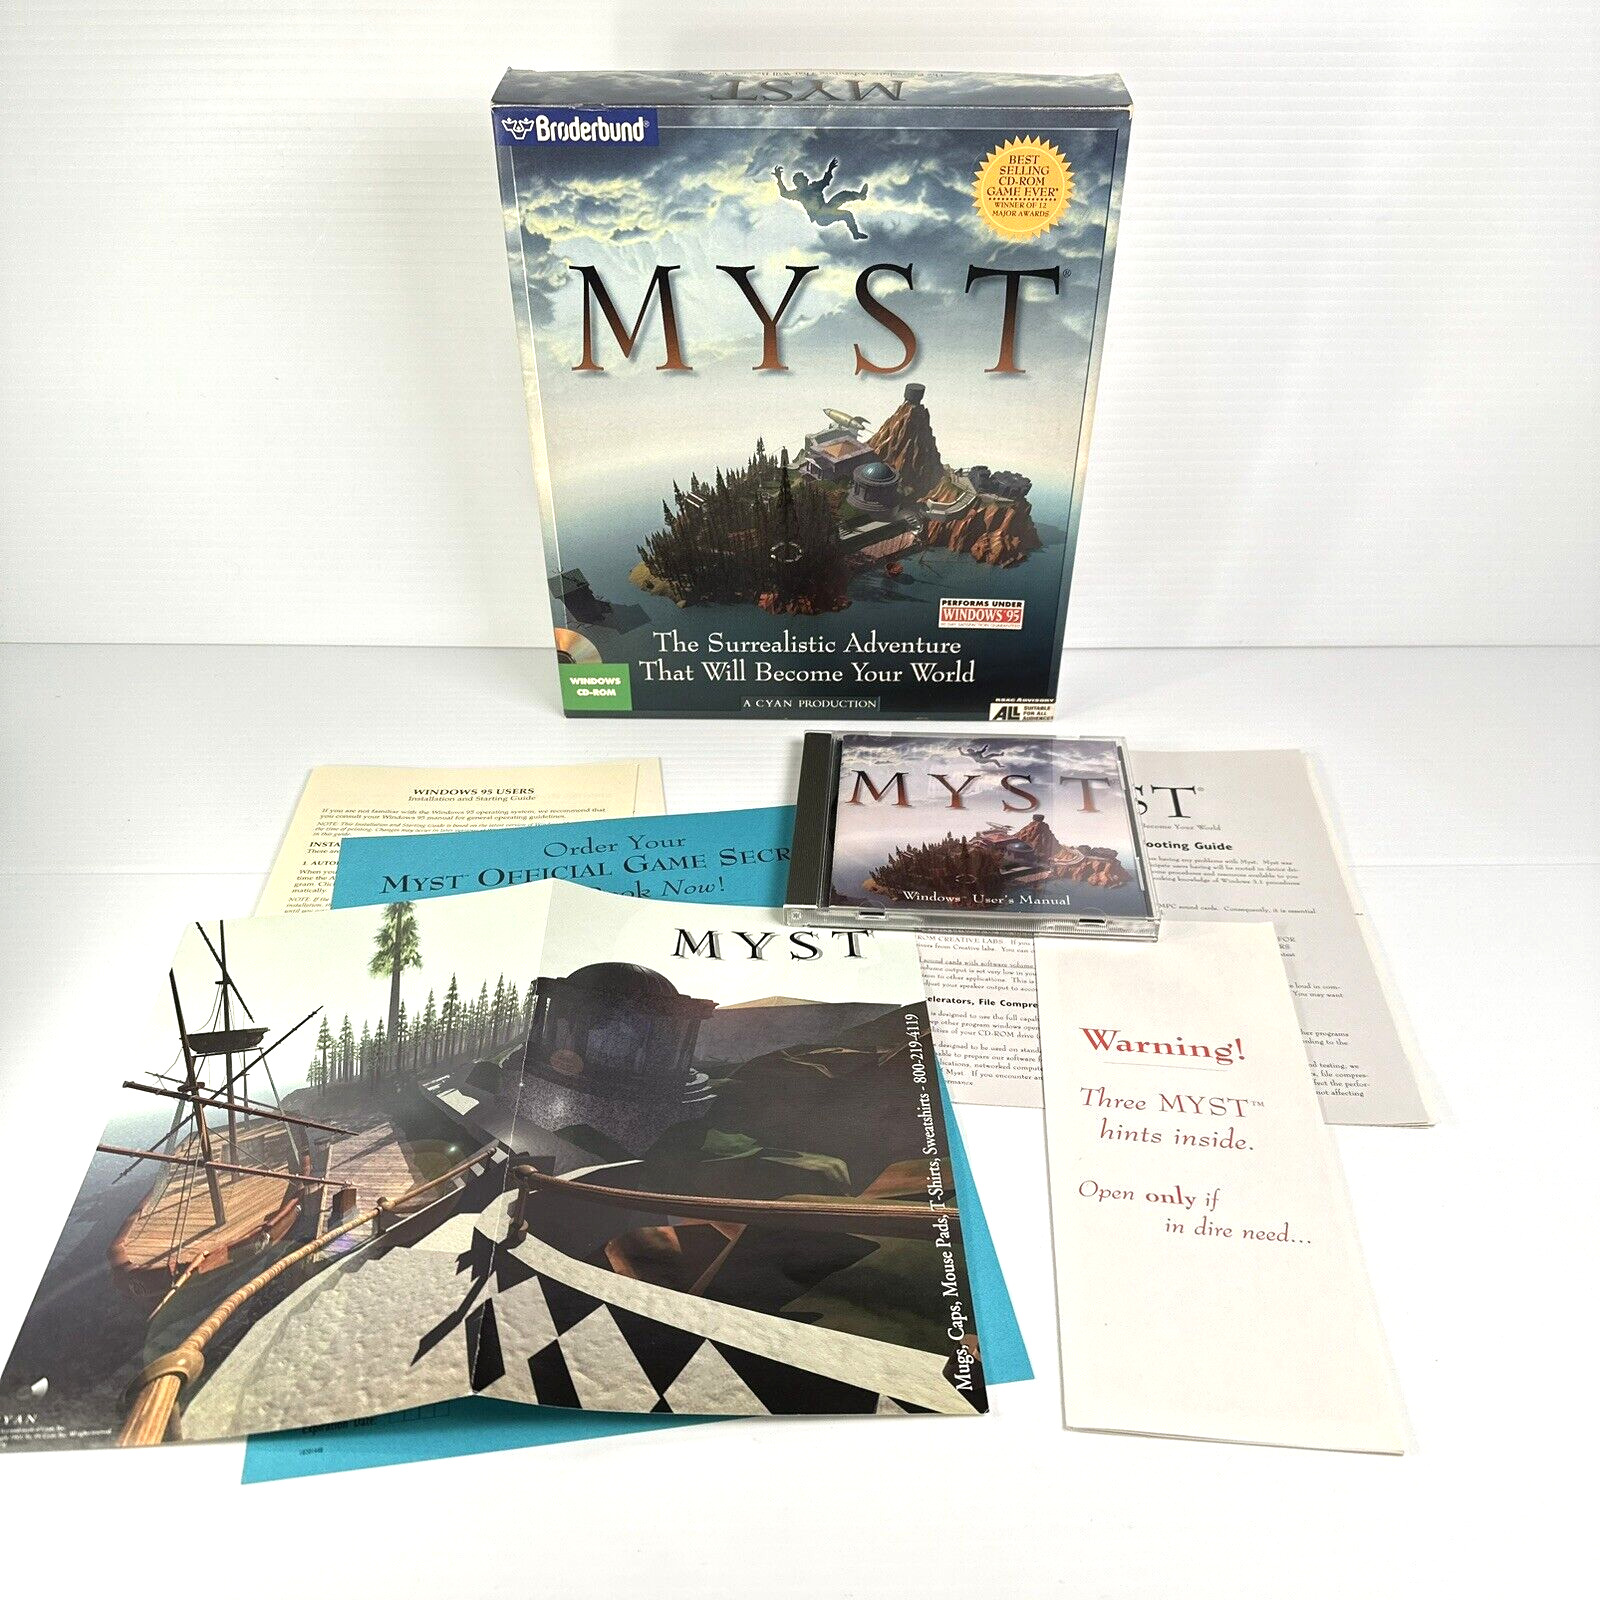 Myst CD-ROM Big Box PC Game Windows 95 3.1 with Inserts Vintage 1990s